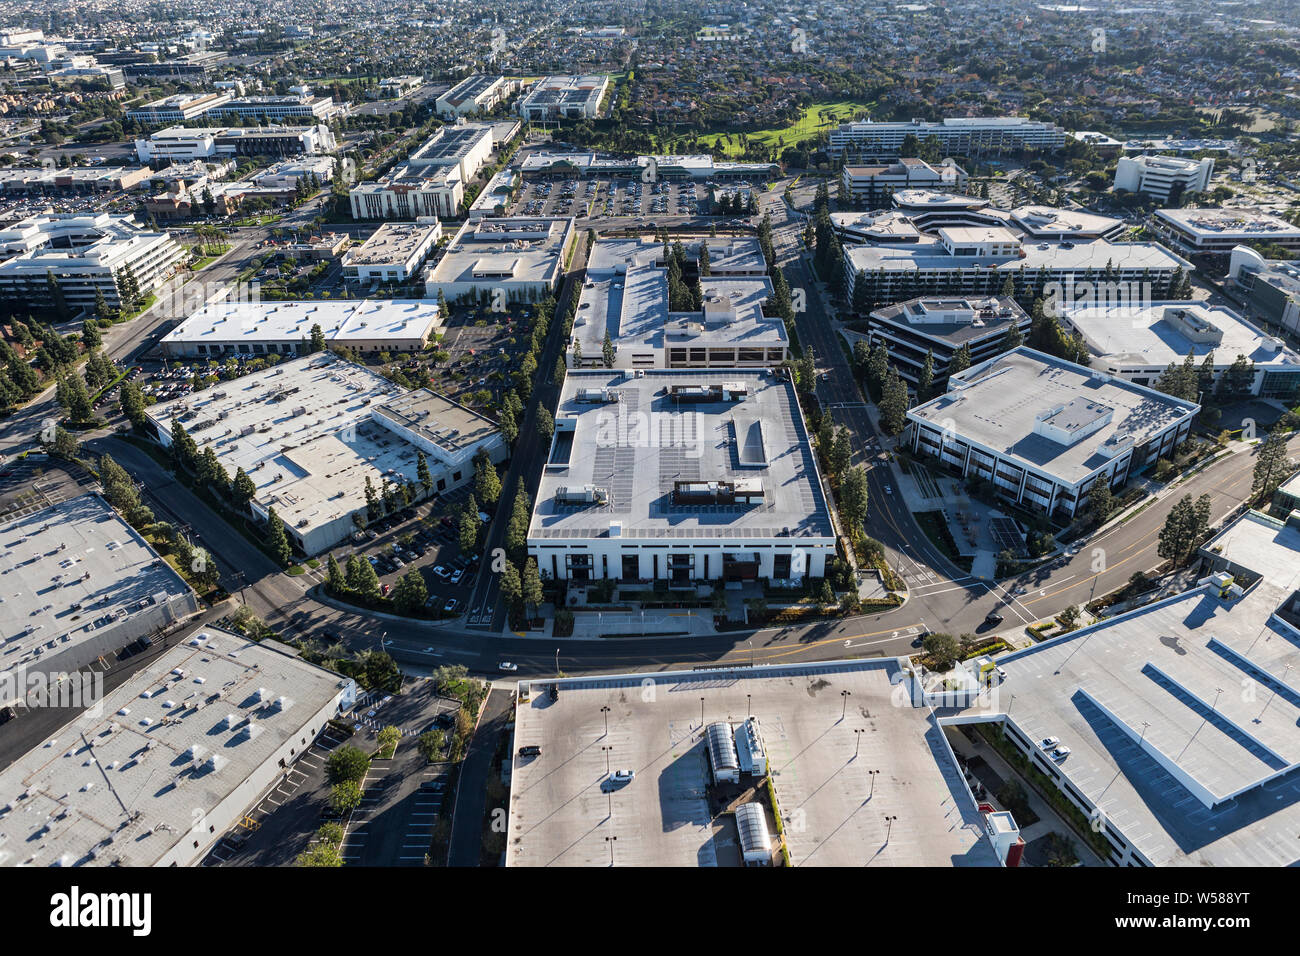 Aerial view of suburban commercial and industrial buildings in Los Angeles County, California. Stock Photo